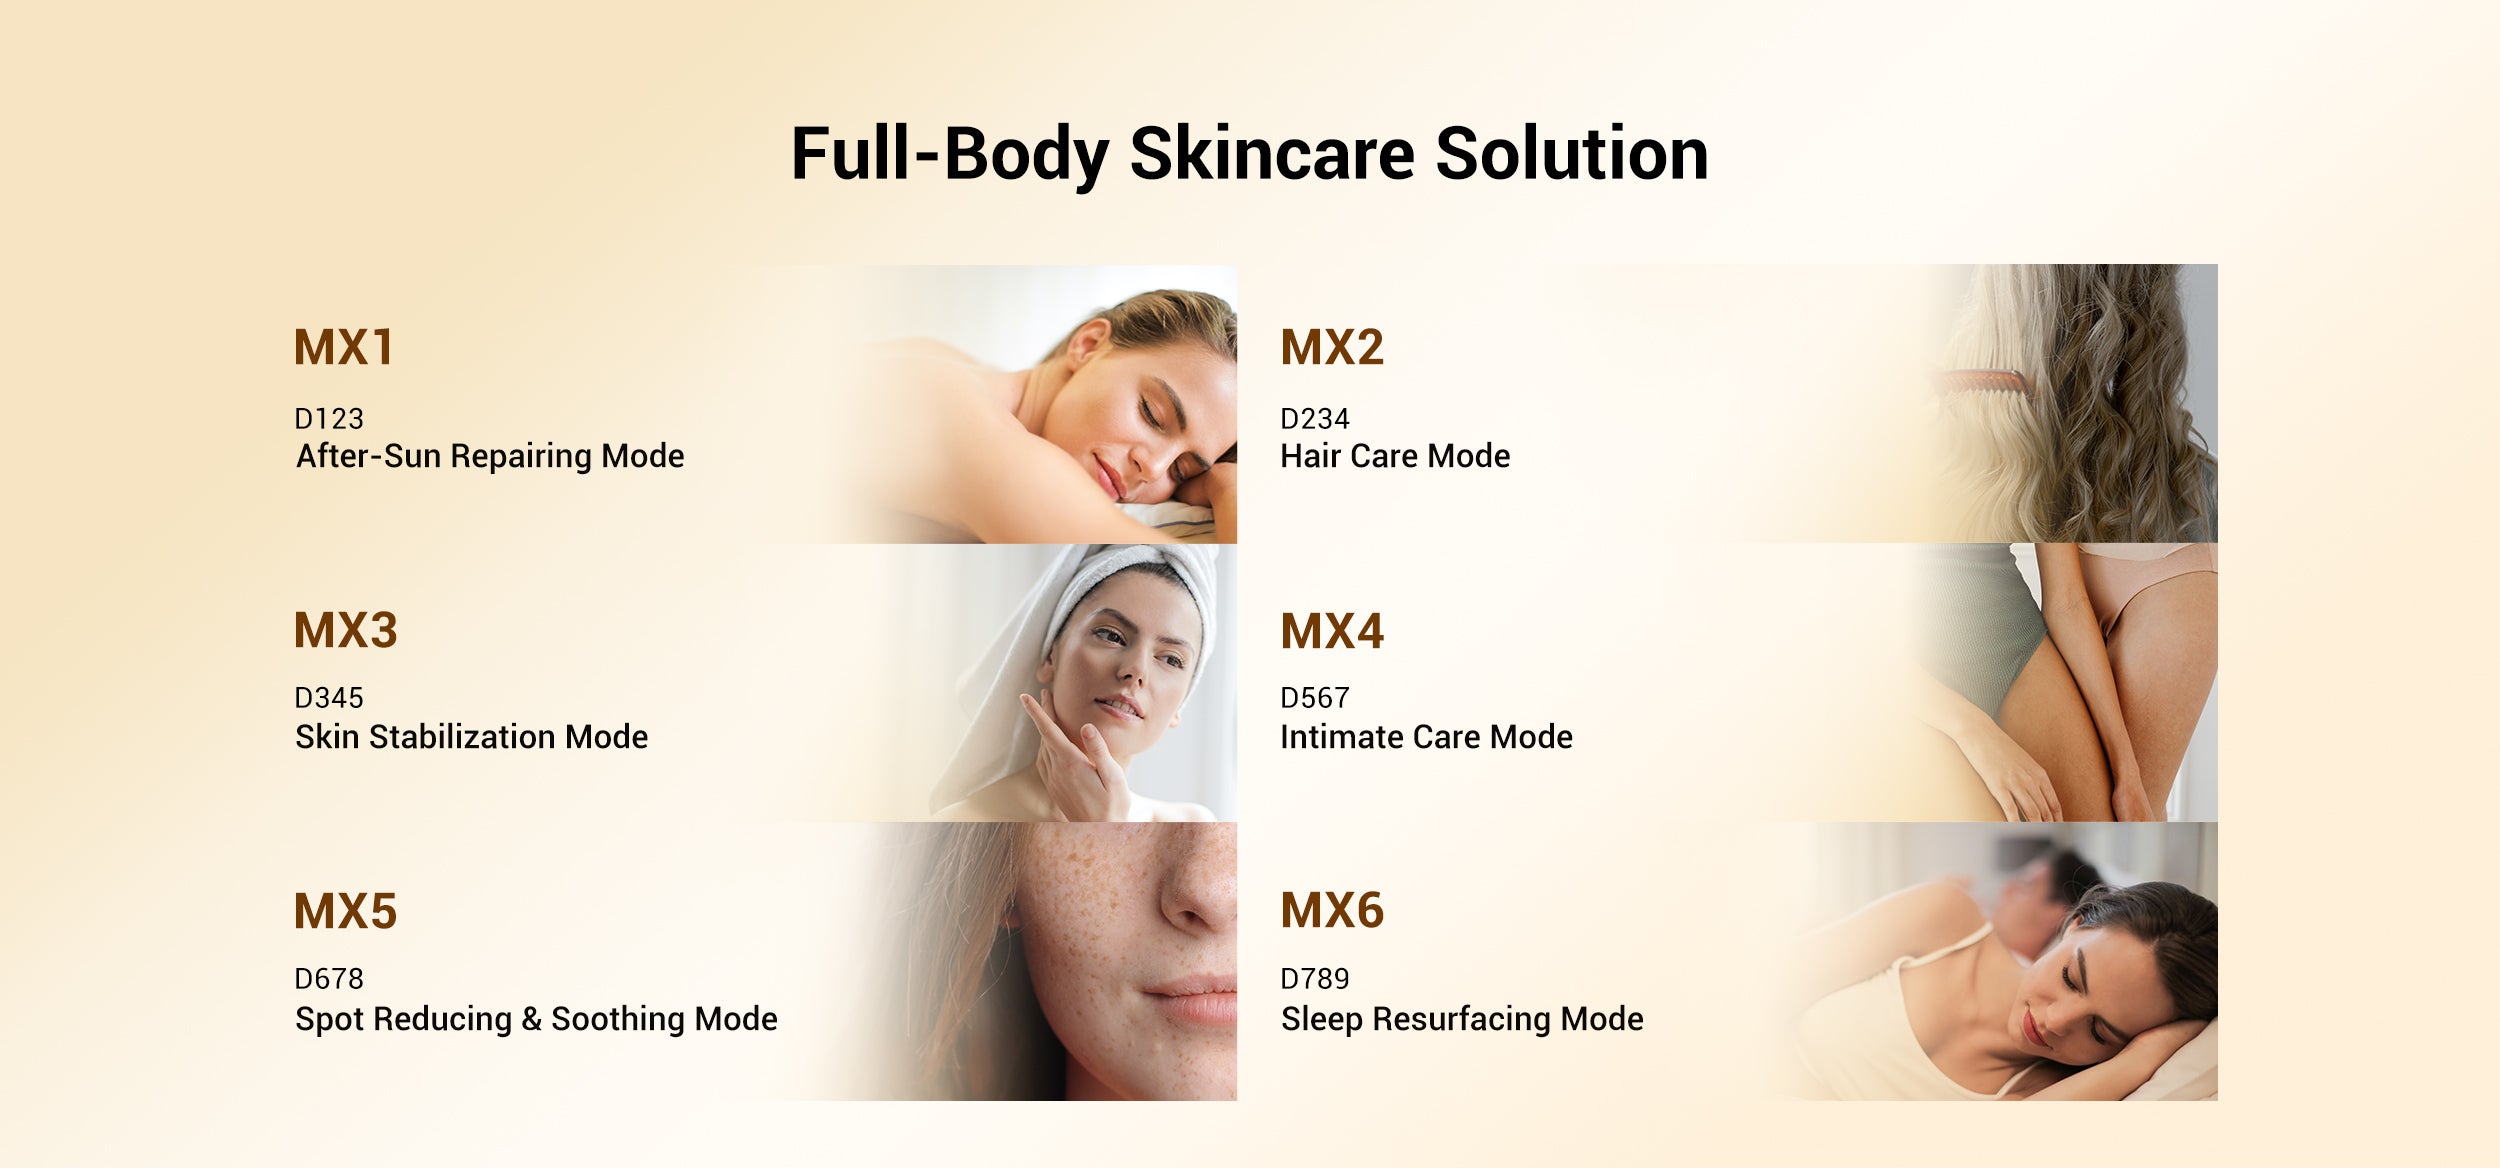 Full-Body Skincare Solution LED Light Modes: After-Sun Repair, Hair Care, Skin Stabilization, Intimate Care, Spot Reduction, and Sleep Resurfacing for Comprehensive Care.